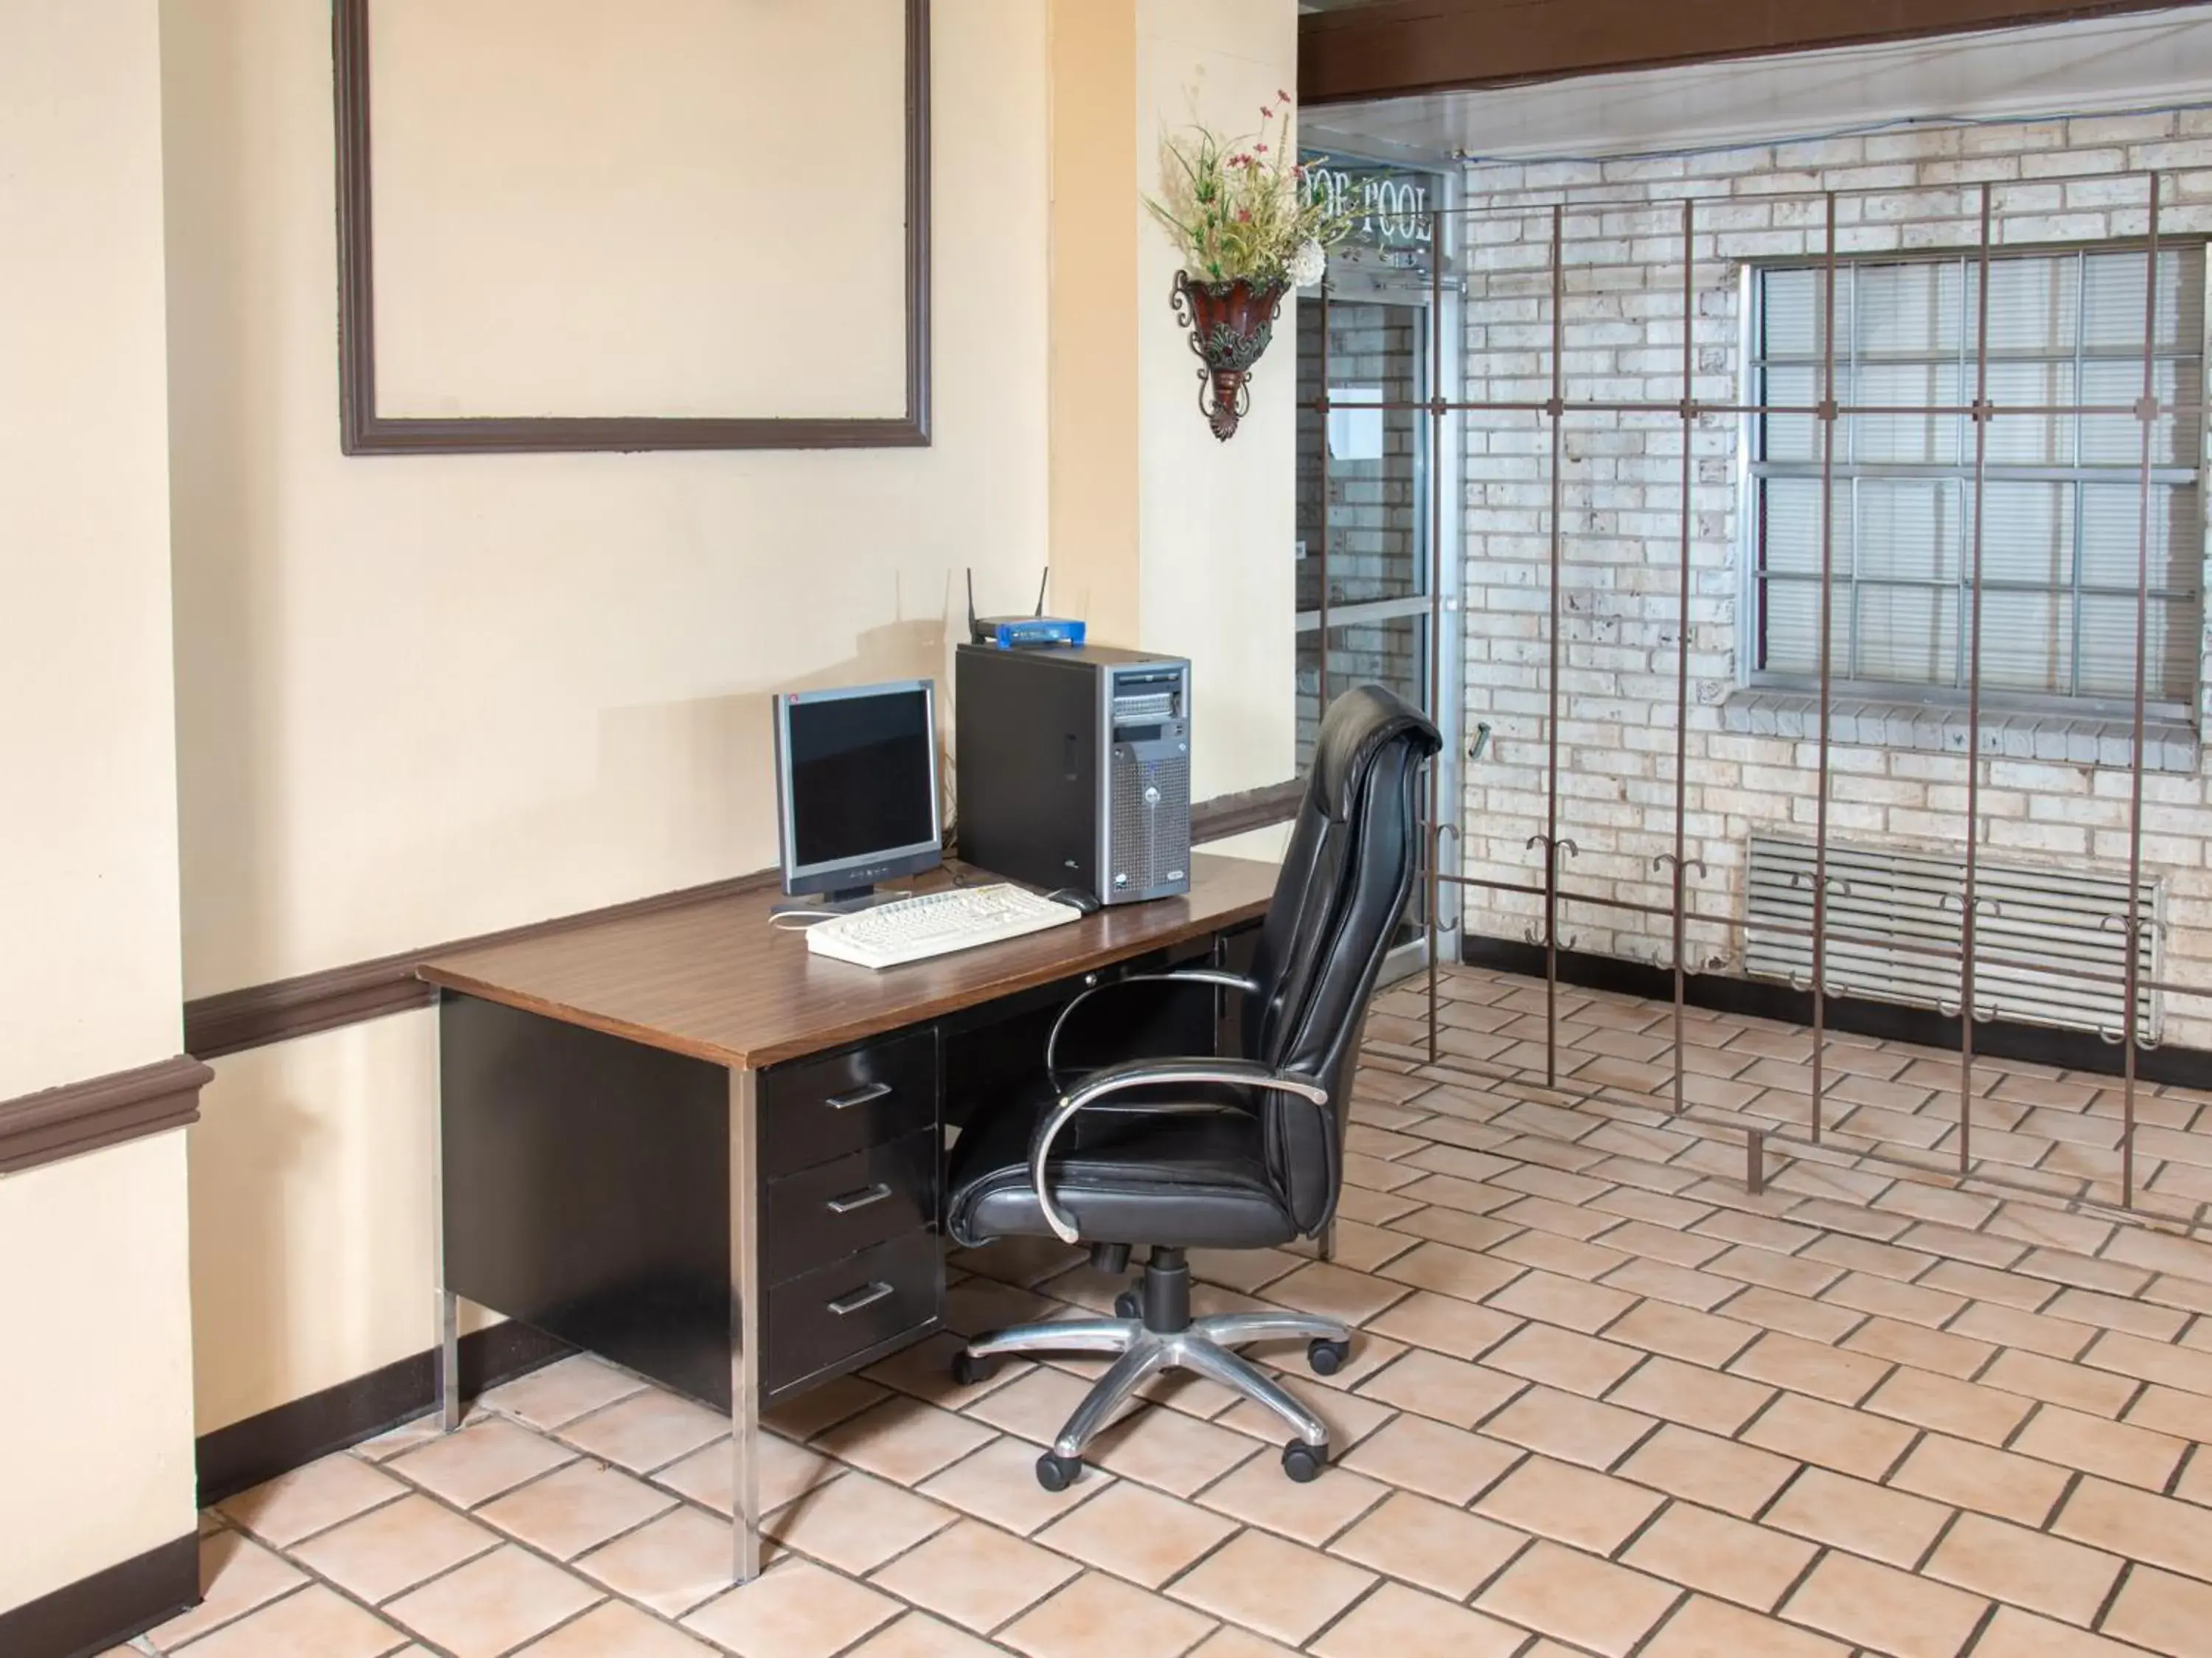 Business facilities in Rest Inn - Extended Stay, I-40 Airport, Wedding & Event Center